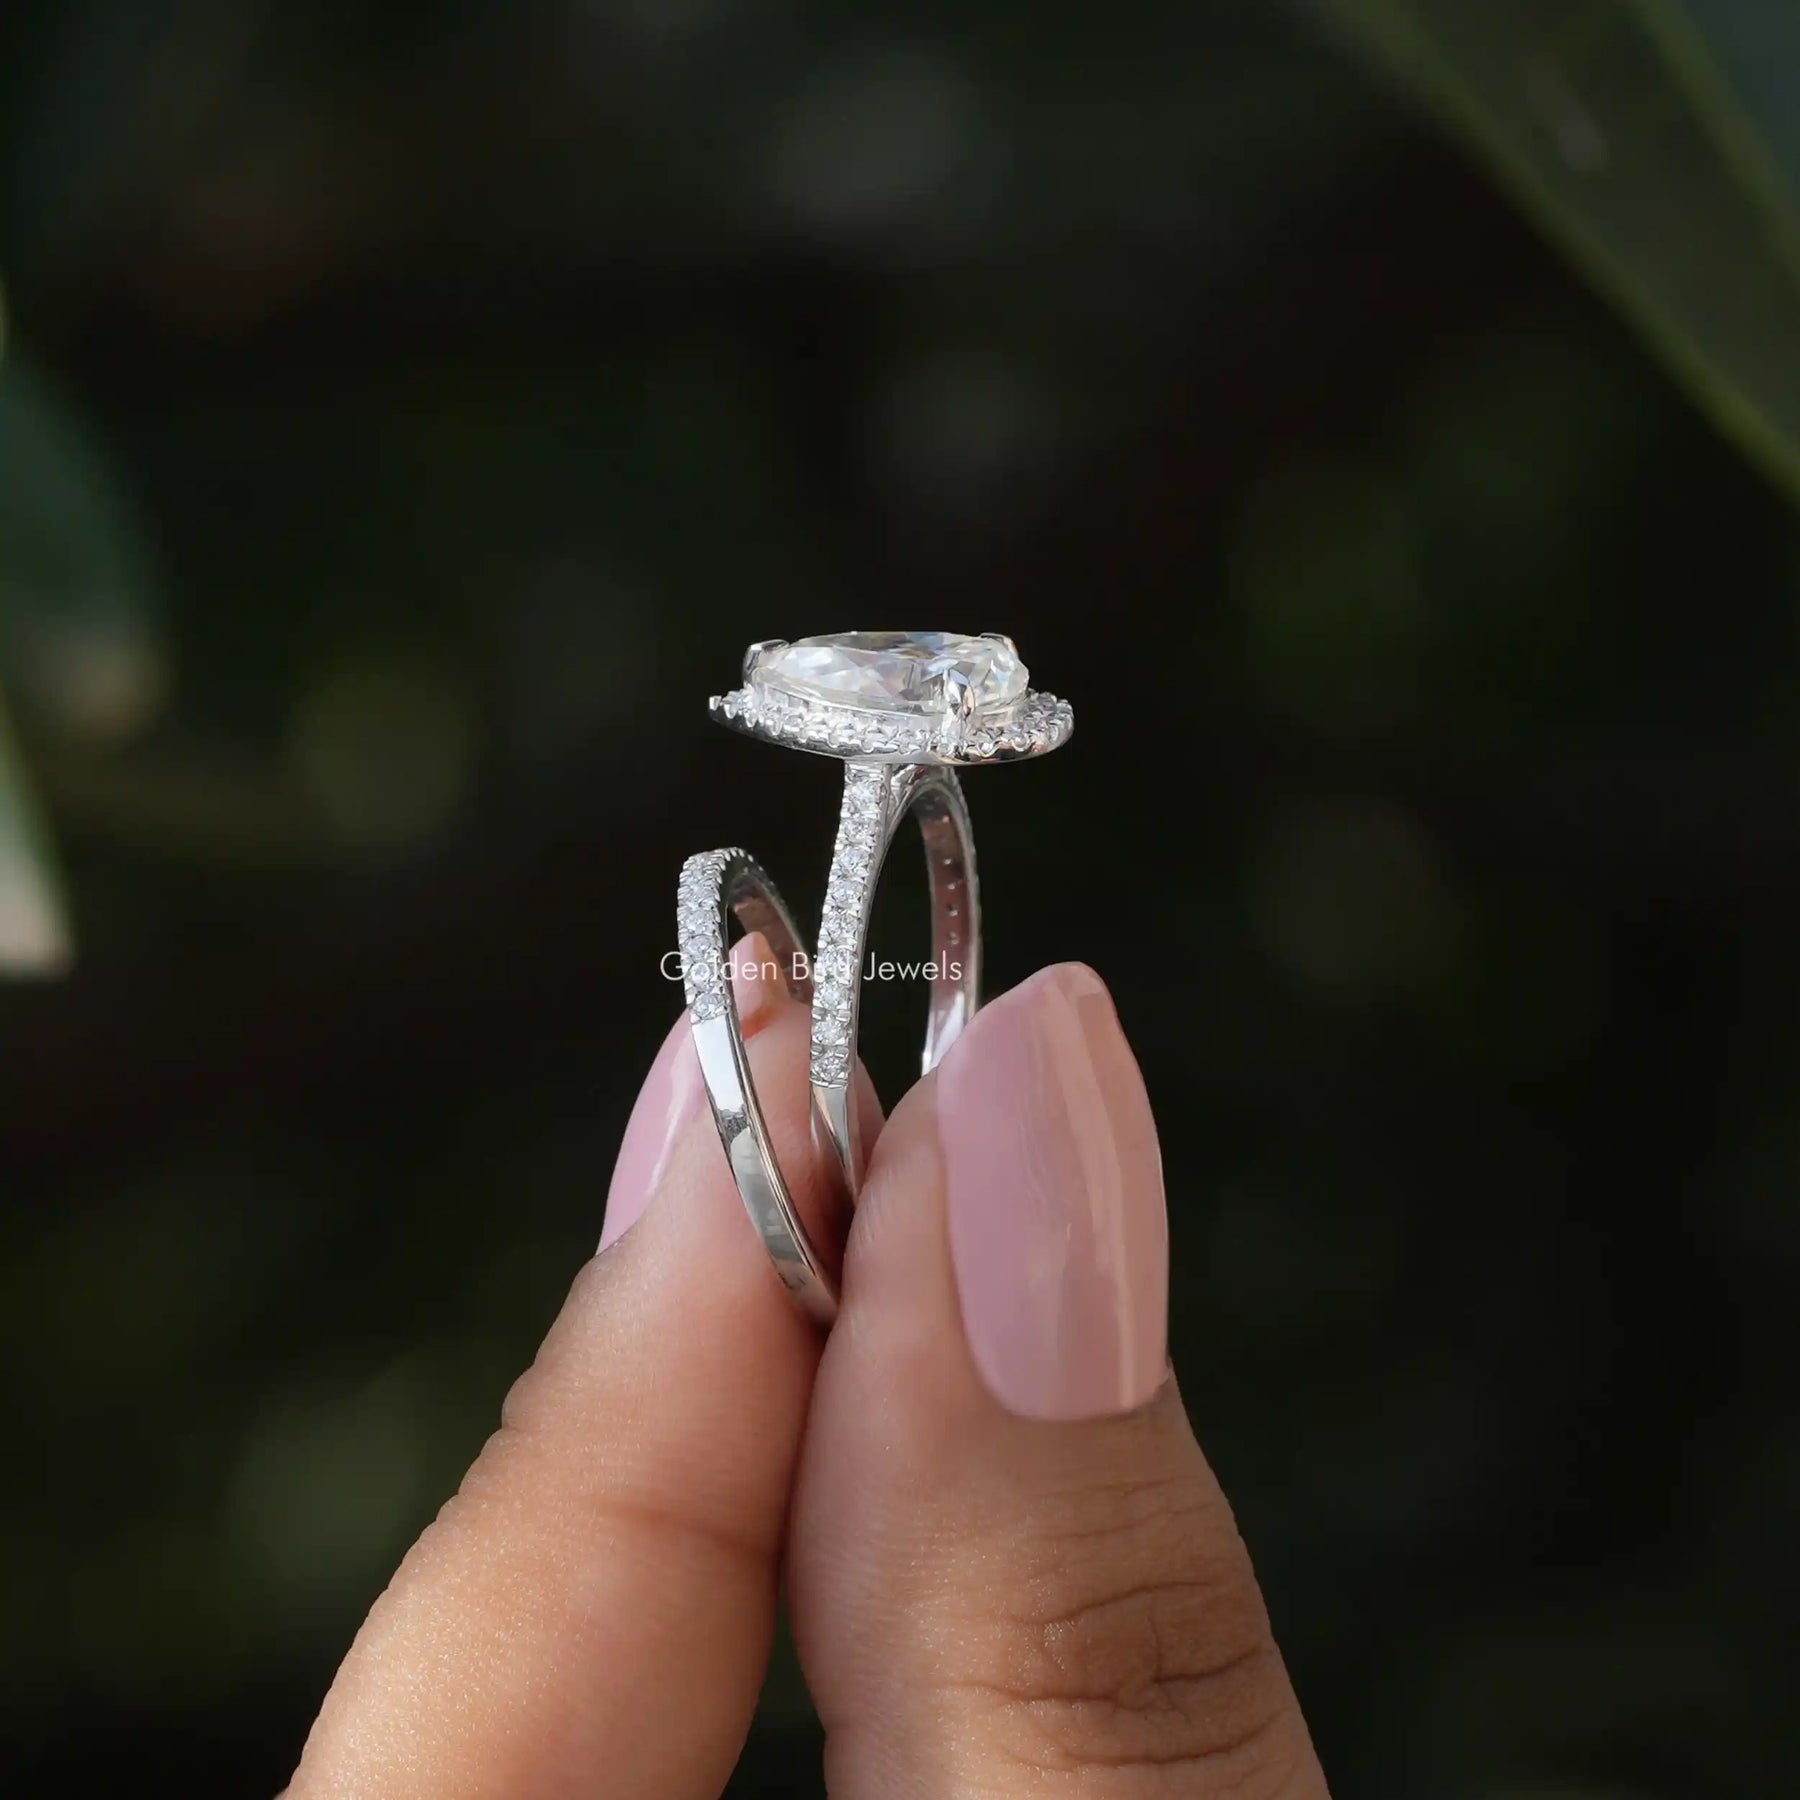 [This pear shaped halo moissanite wedding ring set in prong setting]-[Golden Bird Jewels]